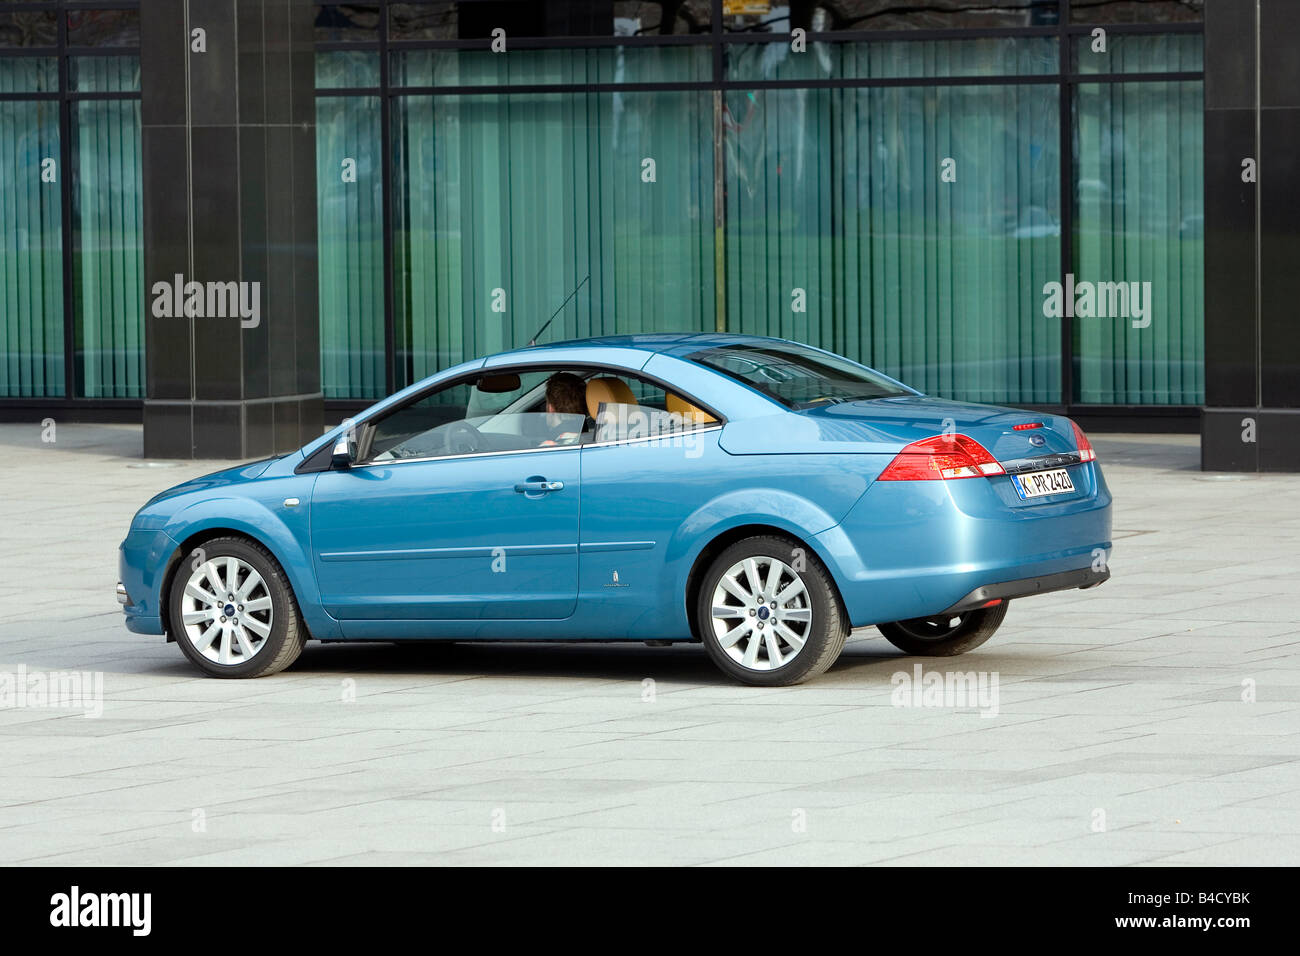 Ford Focus 2.0 TDCi coupe-Convertible, model year 2007-, blue, standing, upholding, side view, City, closed top Stock Photo